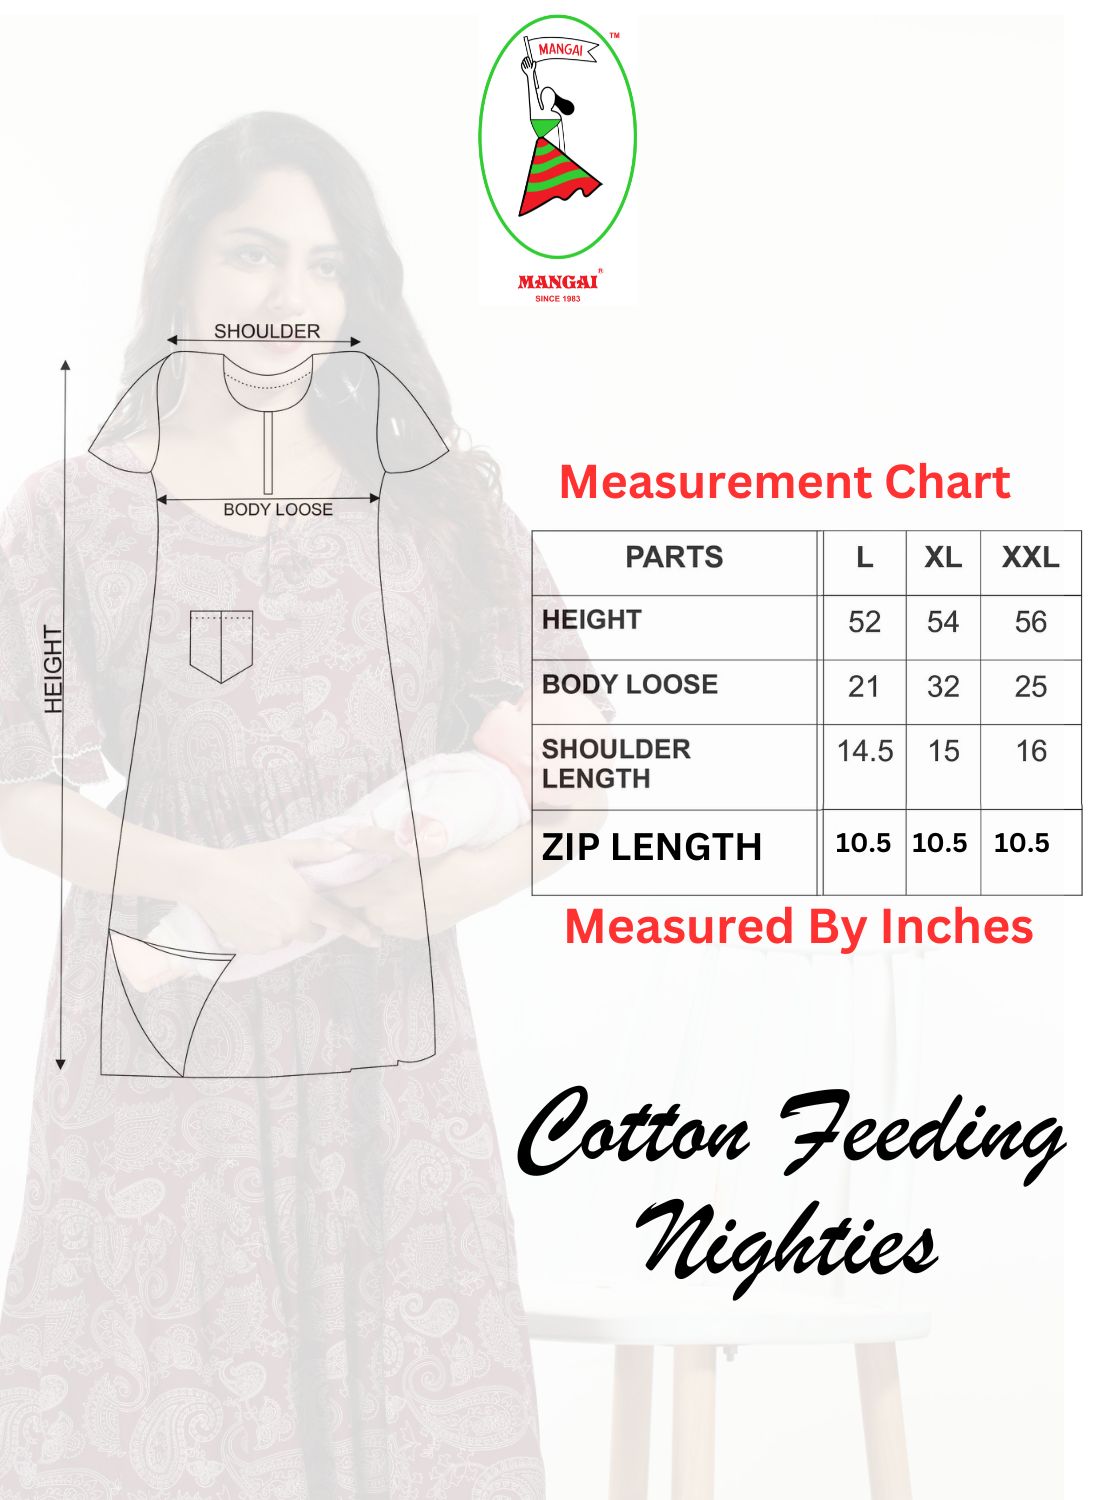 MANGAI Premium Cotton Printed Feeding Nighties | Soft Cotton | Above Knee Length Covered | Front Open Zipper| Vertical Feeding Zipper | Feeding Nighties